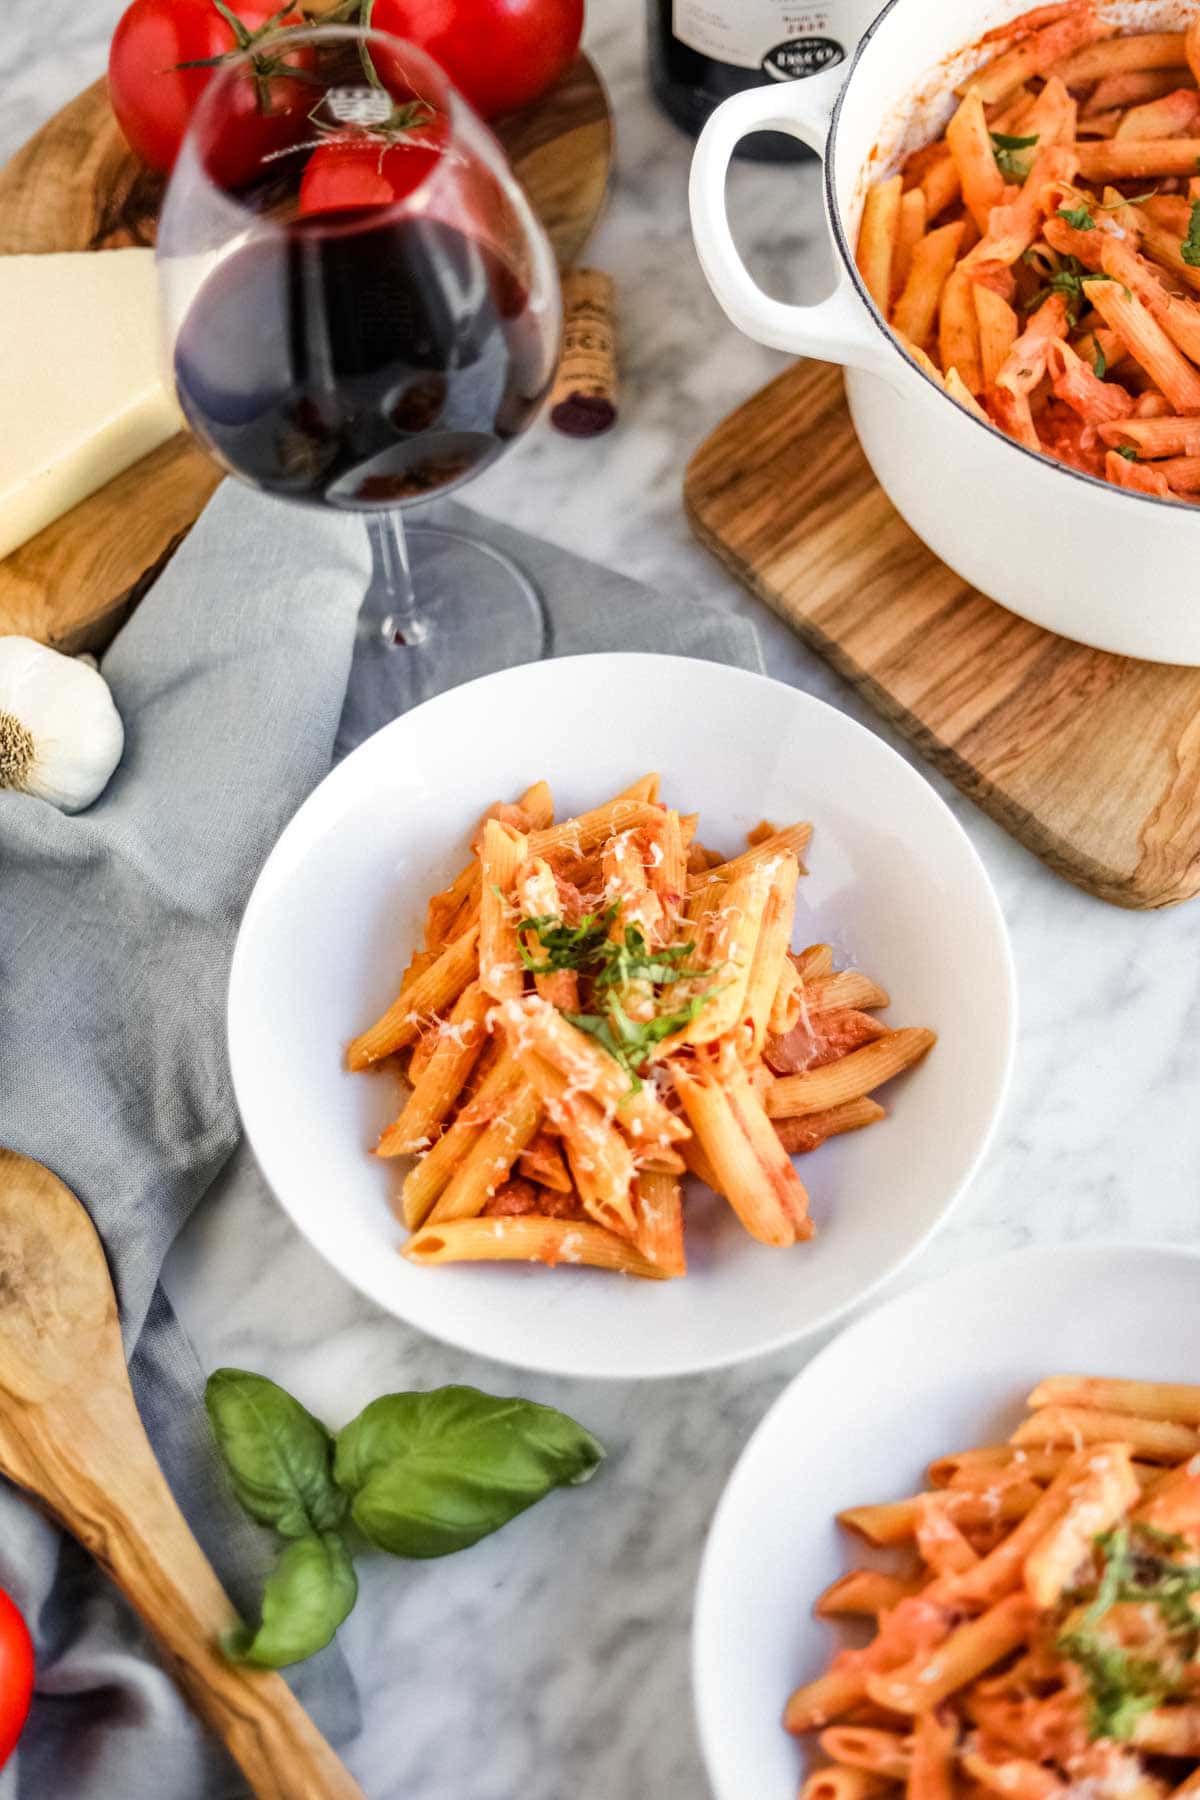 Penne pasta with vodka sauce in white bowls and dutch oven with wine, garlic, tomatoes and cheese in background.